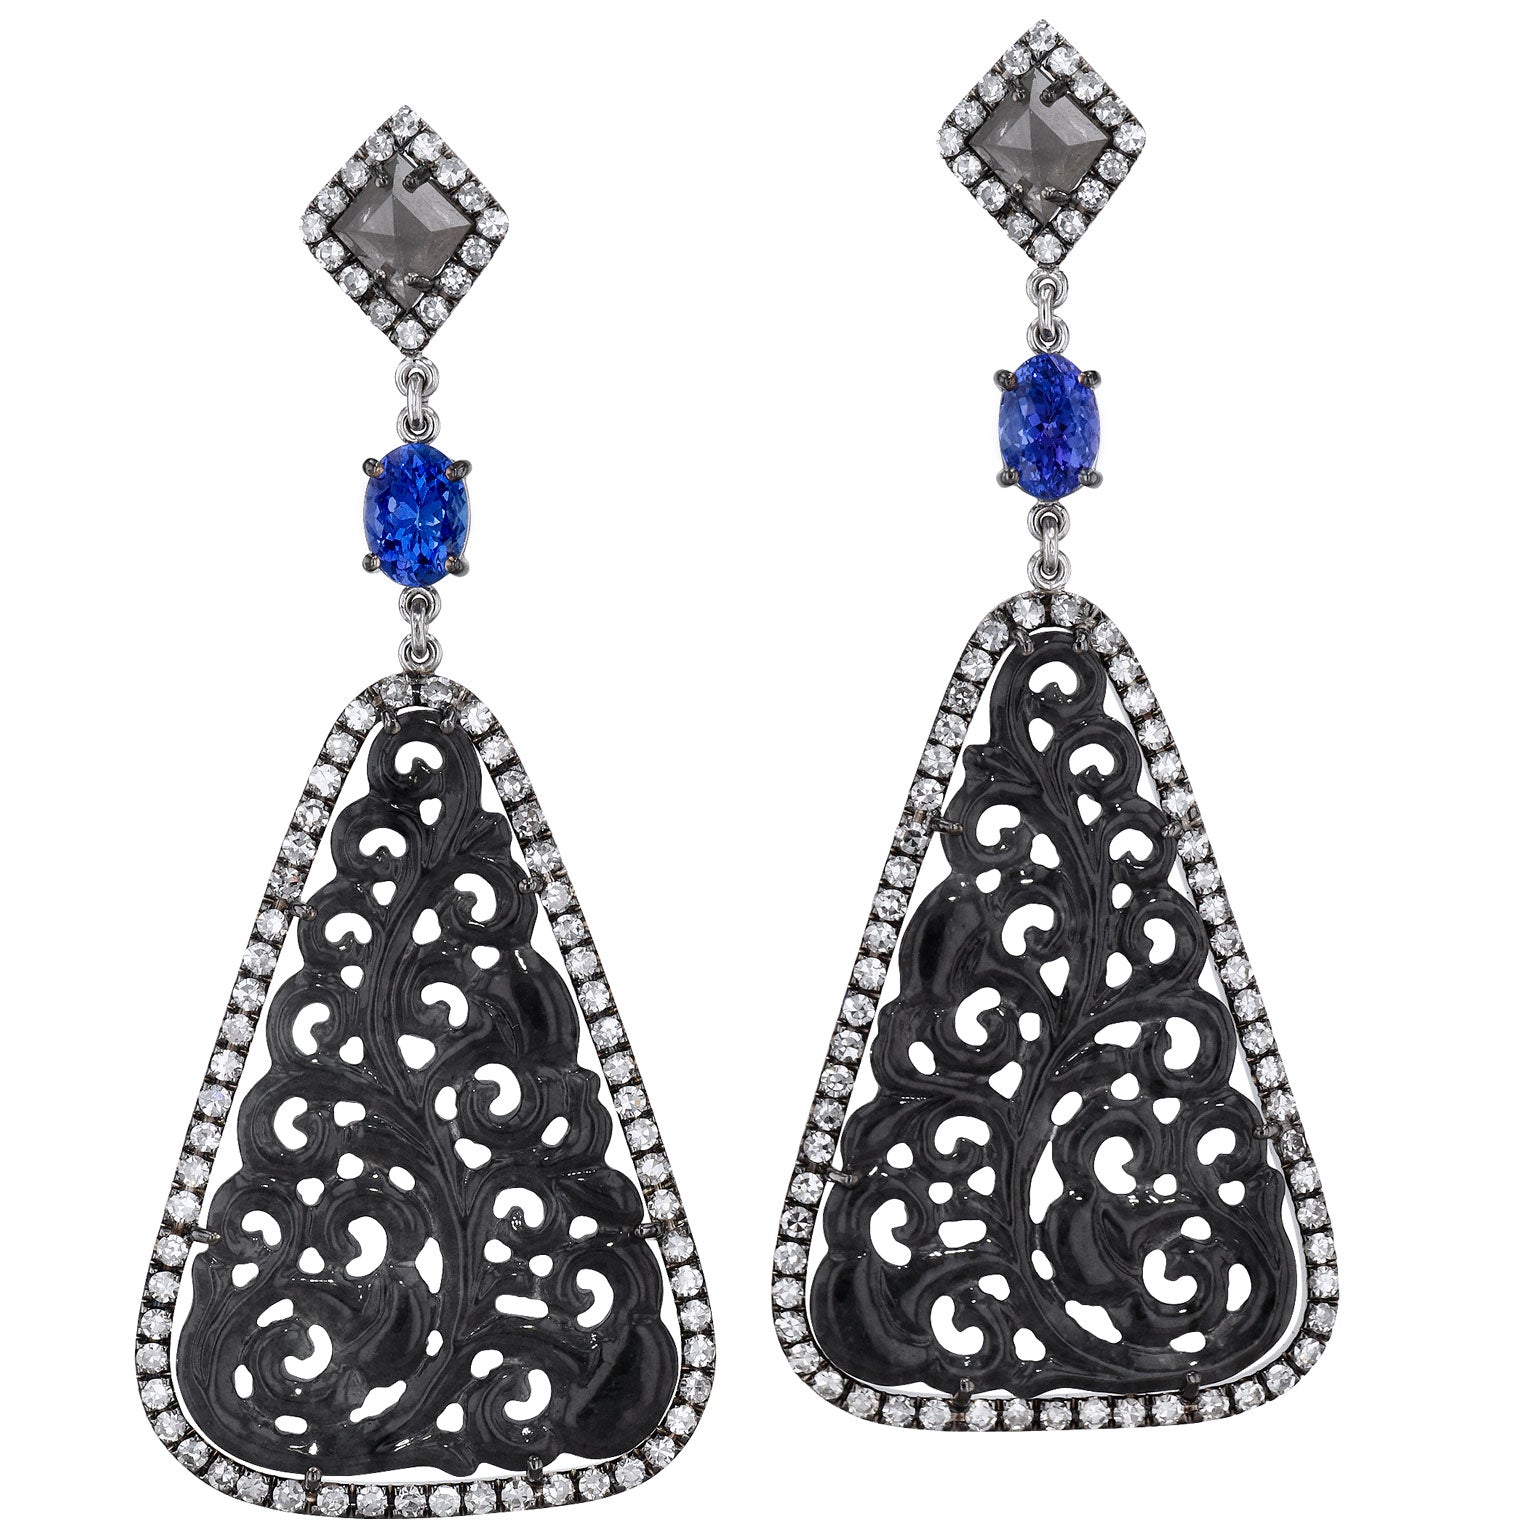 Anthracite Hue Jadeite Slice Drop Earrings with Tanzanite Gems and Diamond Pave Earrings H&amp;H Jewels